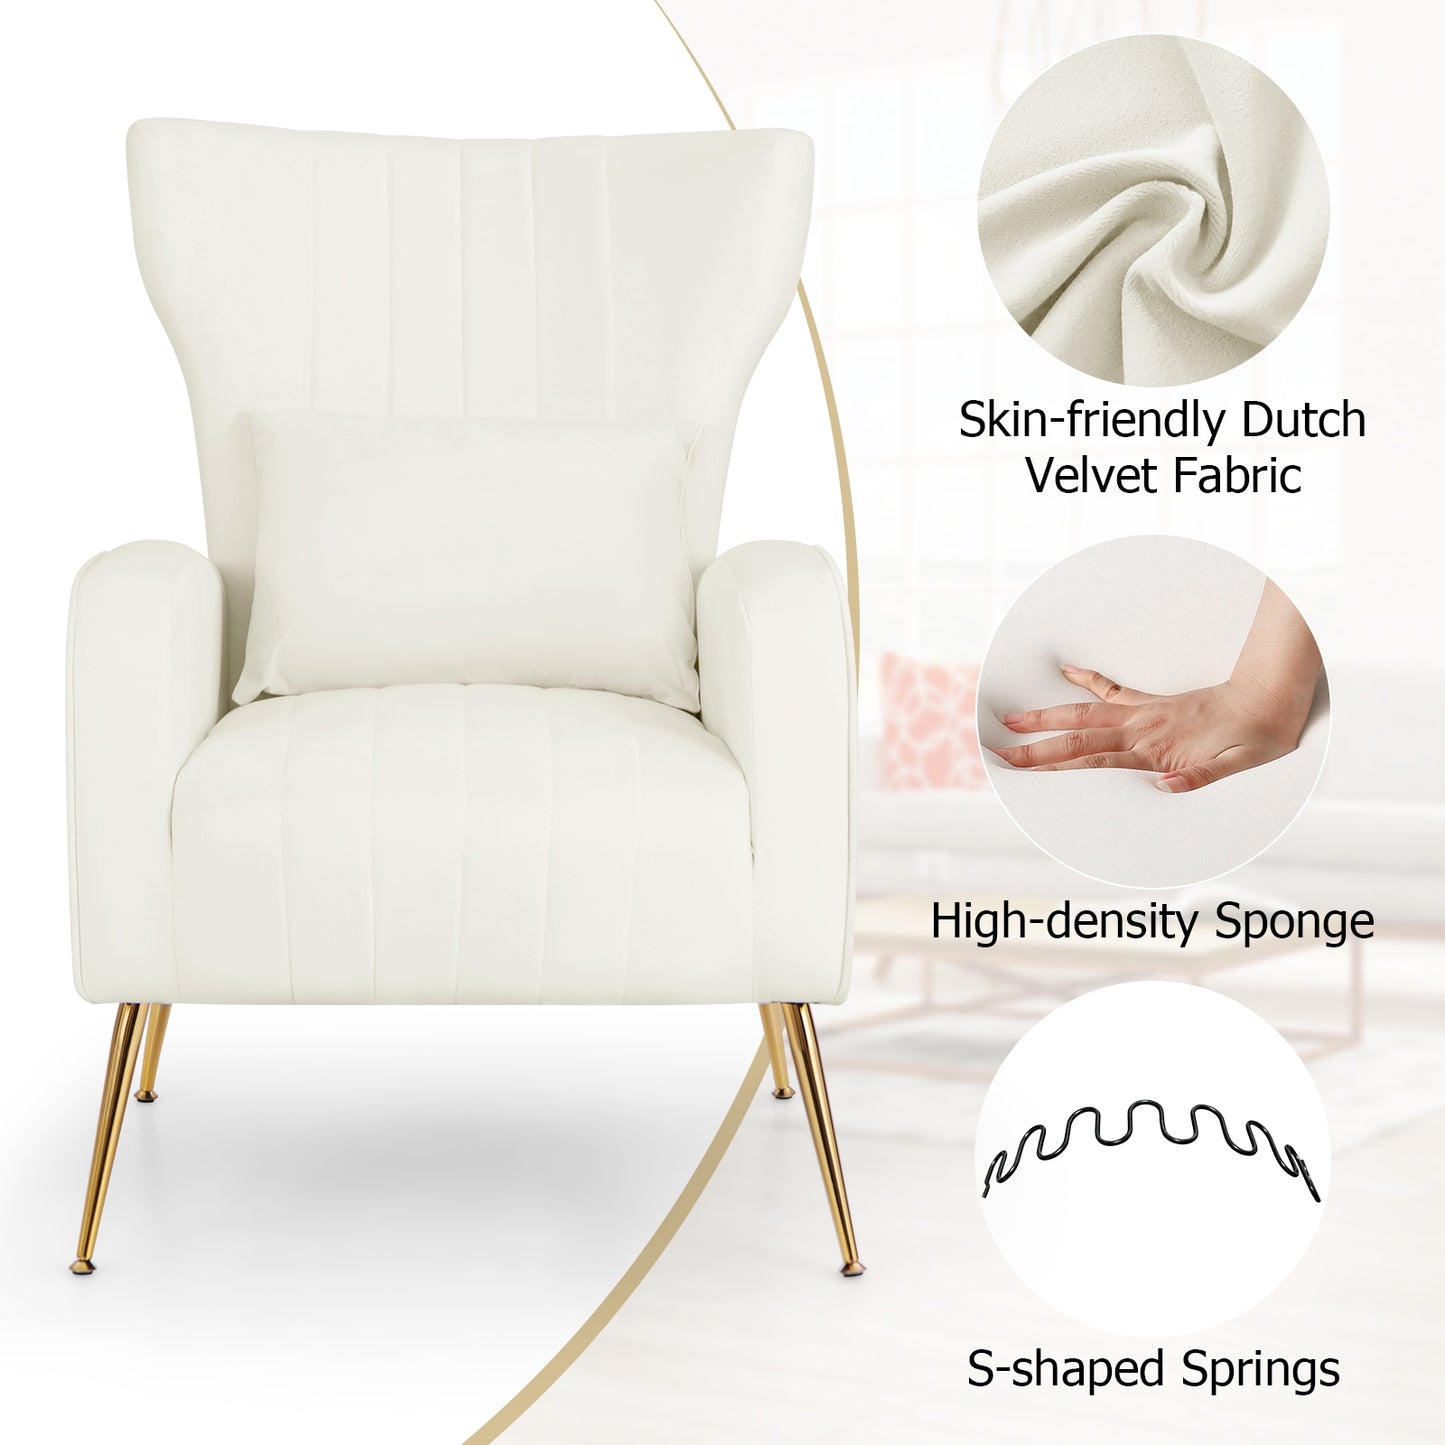 Velvet Upholstered Wingback Chair with Lumbar Pillow and Golden Metal Legs-White